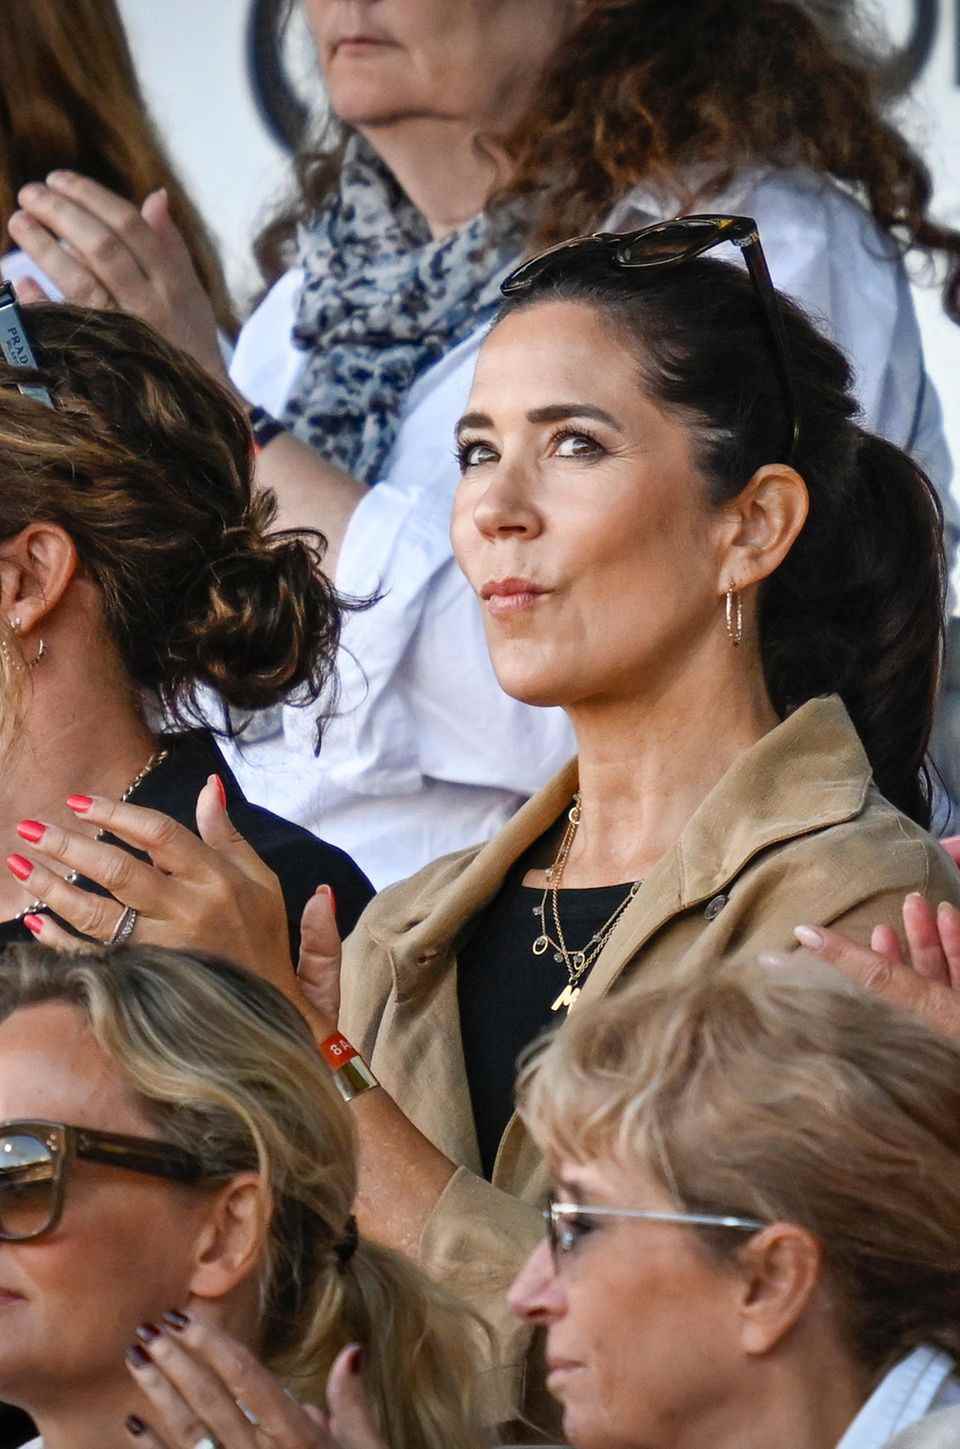 Crown Princess Mary wears a lot of jewelry with her rather simple outfit and has bright red painted fingernails. 